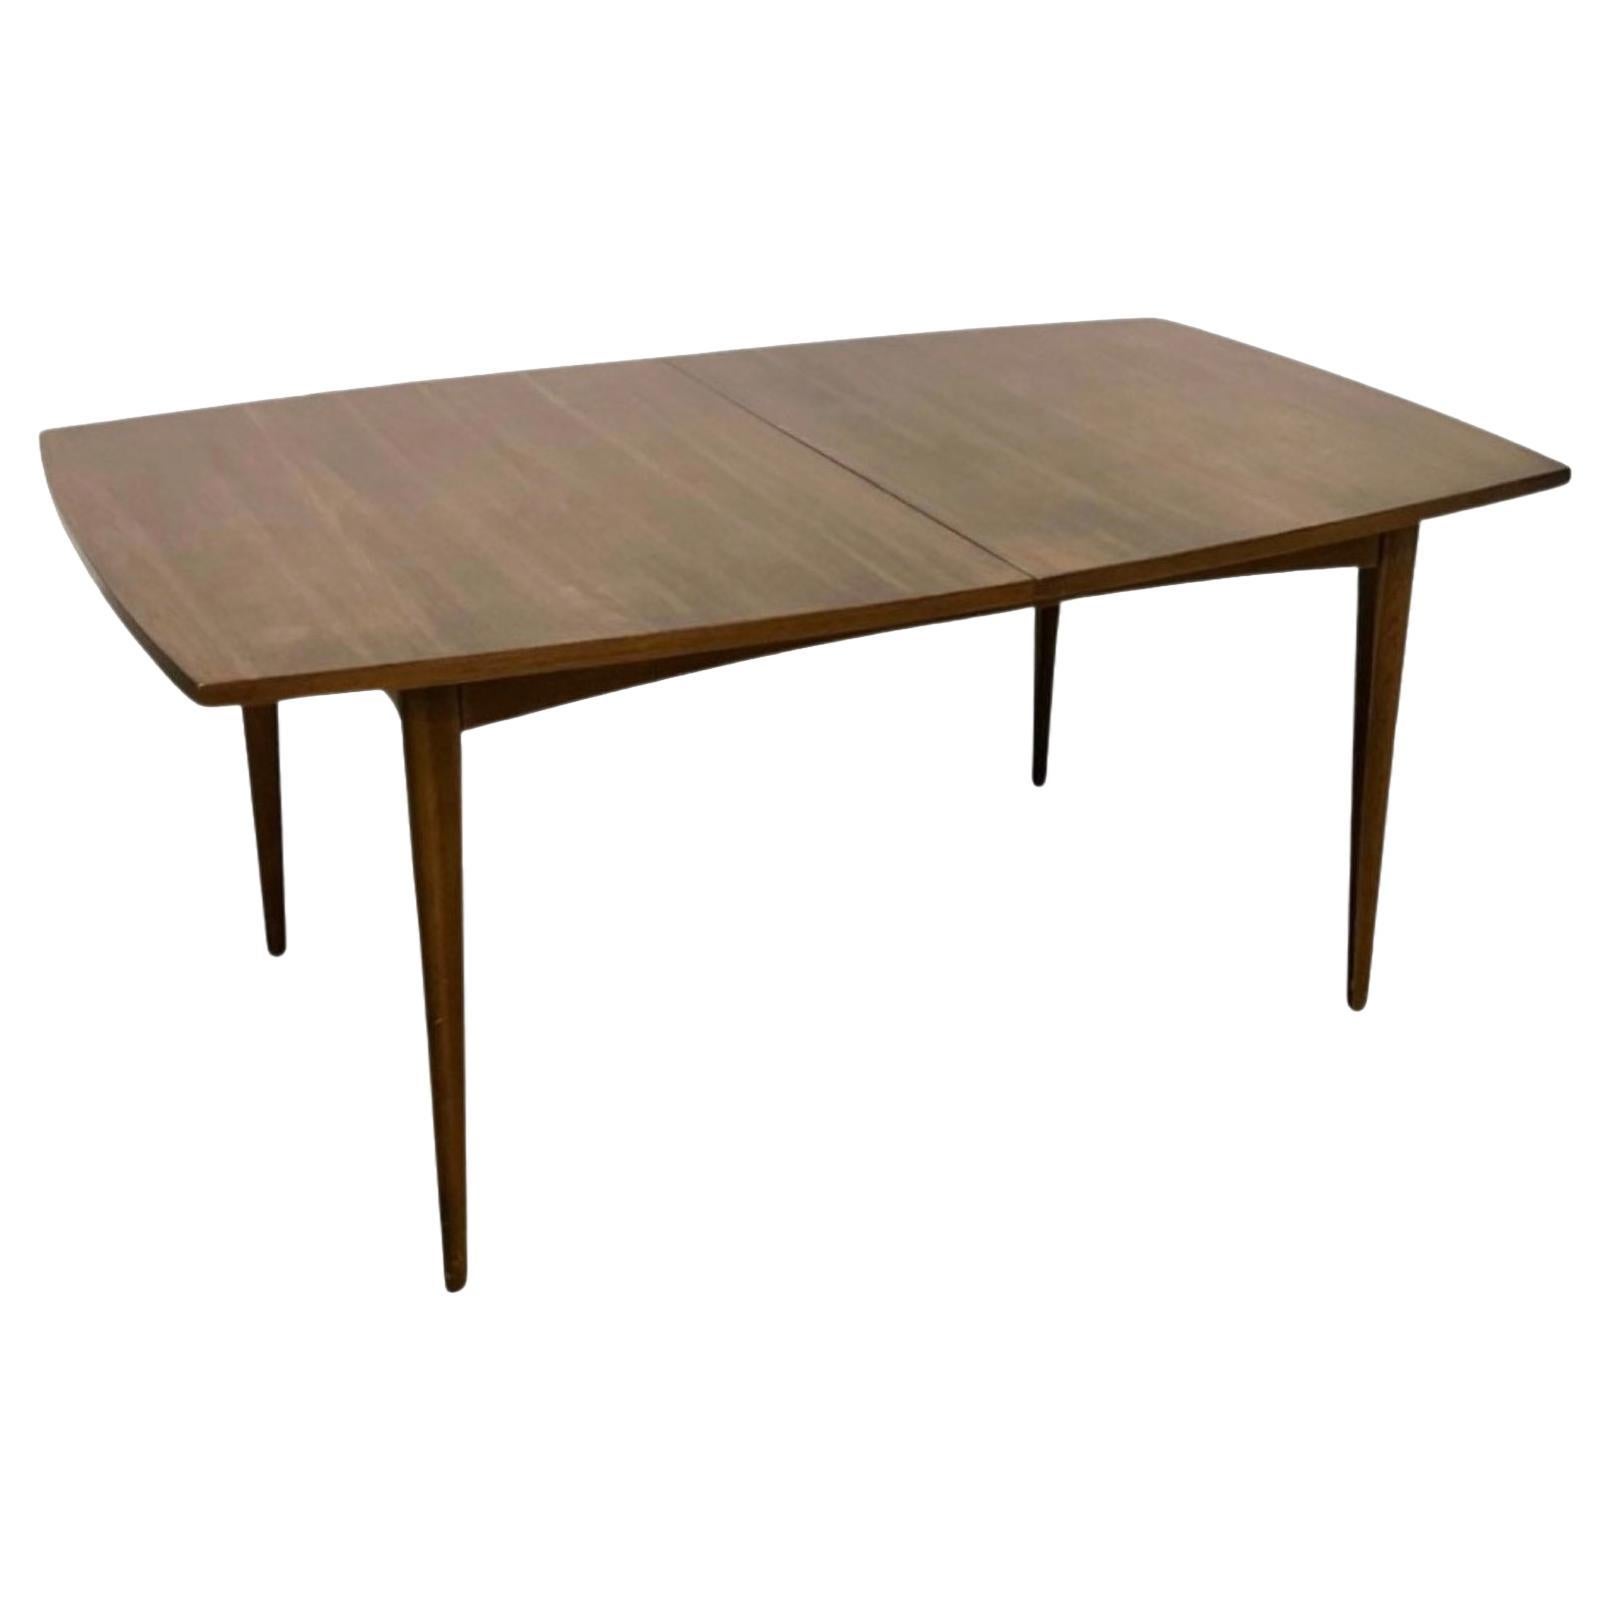 Vintage Broyhill Premier Emphasis Mid Century Modern Dining Table c. 1960s For Sale